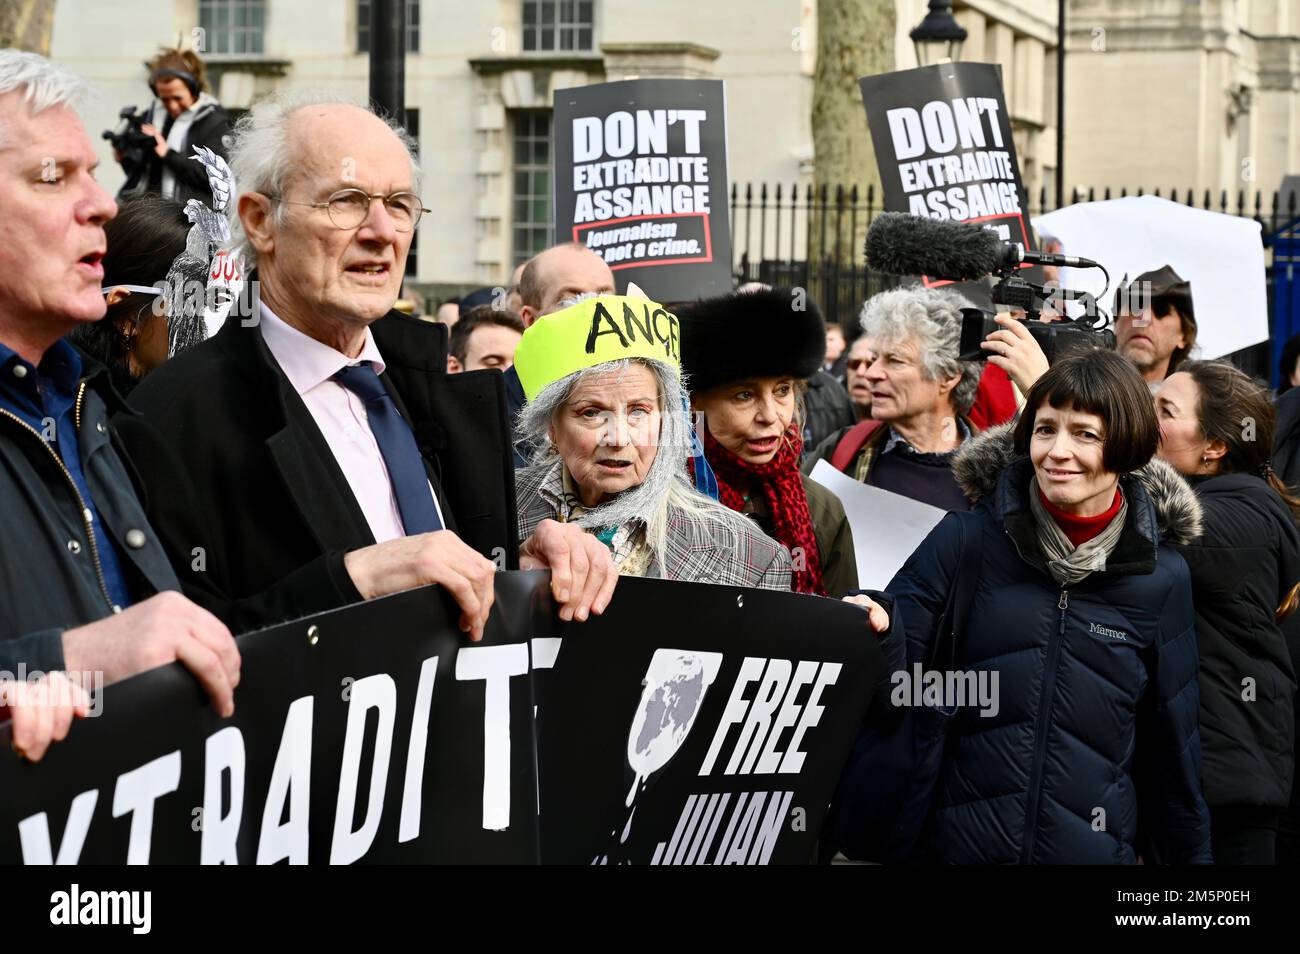 Vivienne Westwood the Queen of British Fashion died aged 81years. FILE PICTURE. John Shipton, Vivenne Westwood. Don't Extradite Julian Assange Protest, Whitehall, London. UK Stock Photo